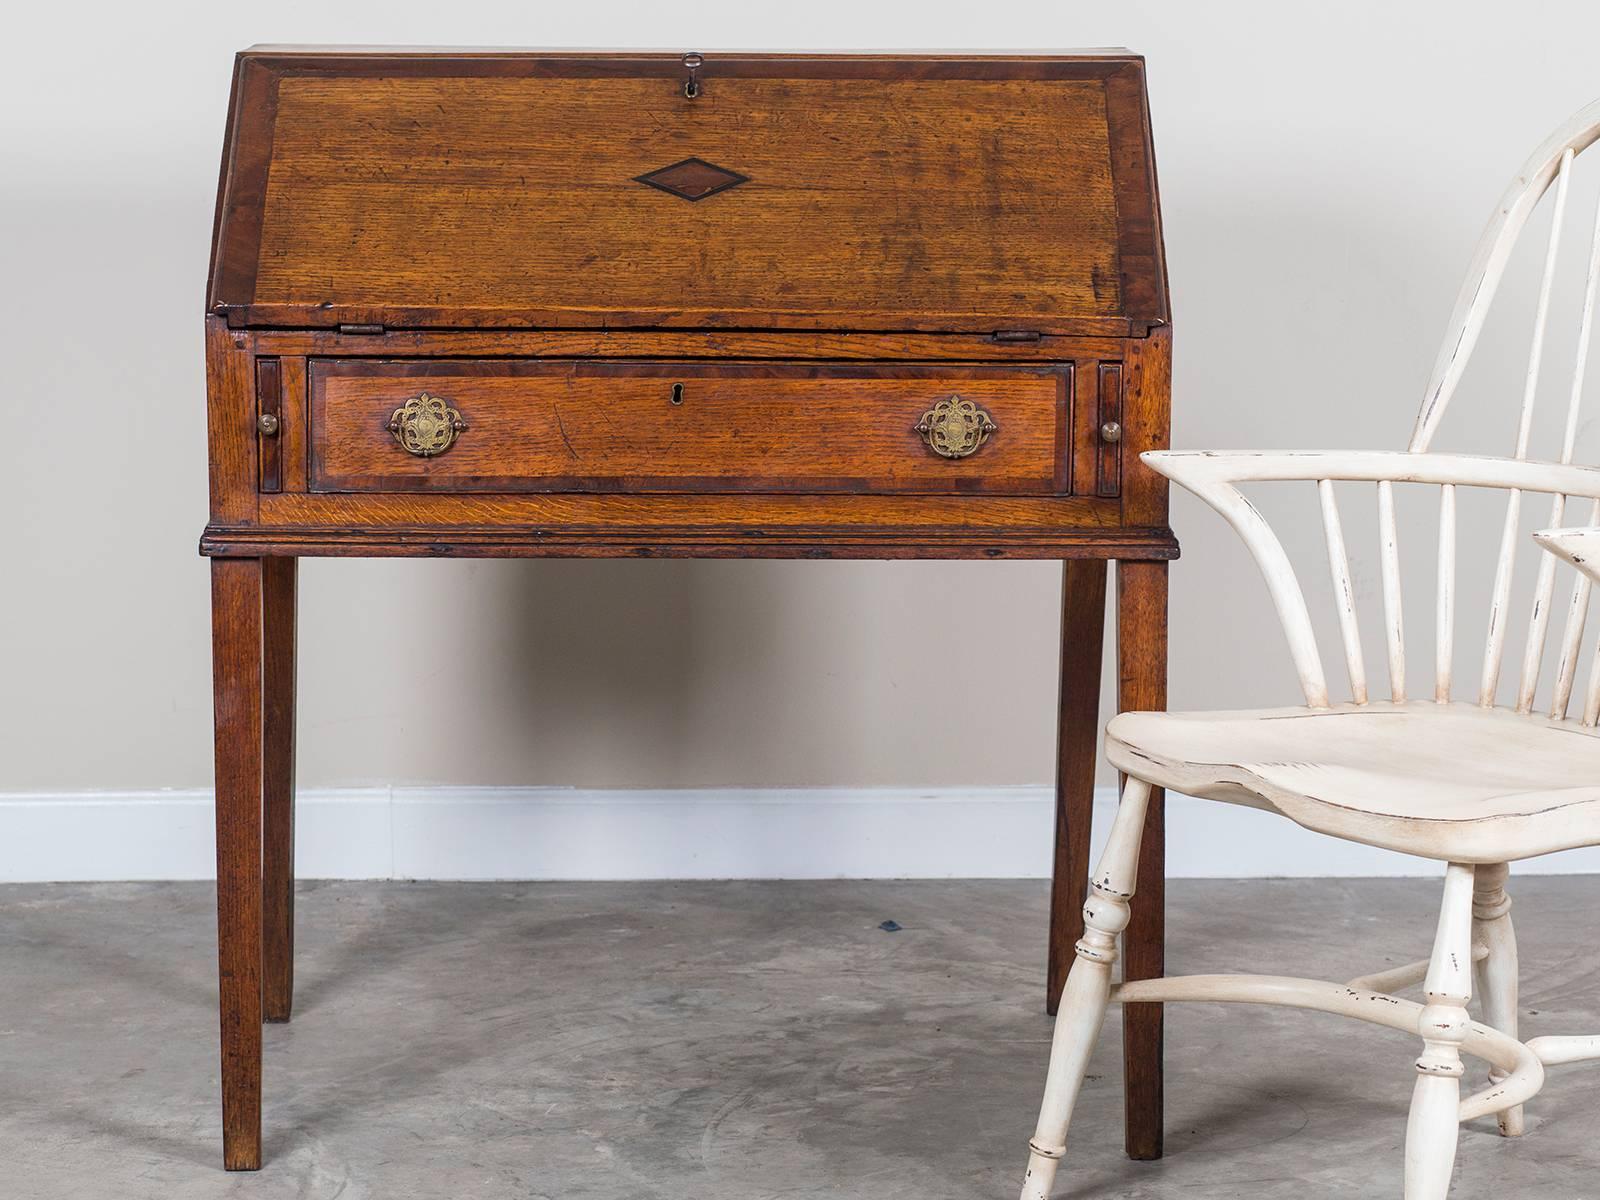 Receive our new selections direct from 1stdibs by email each week. Please click “Follow Dealer” button below and see them first!

The simple lines of this English George III oak desk circa 1760 demonstrates the wonderful skill of 18th century